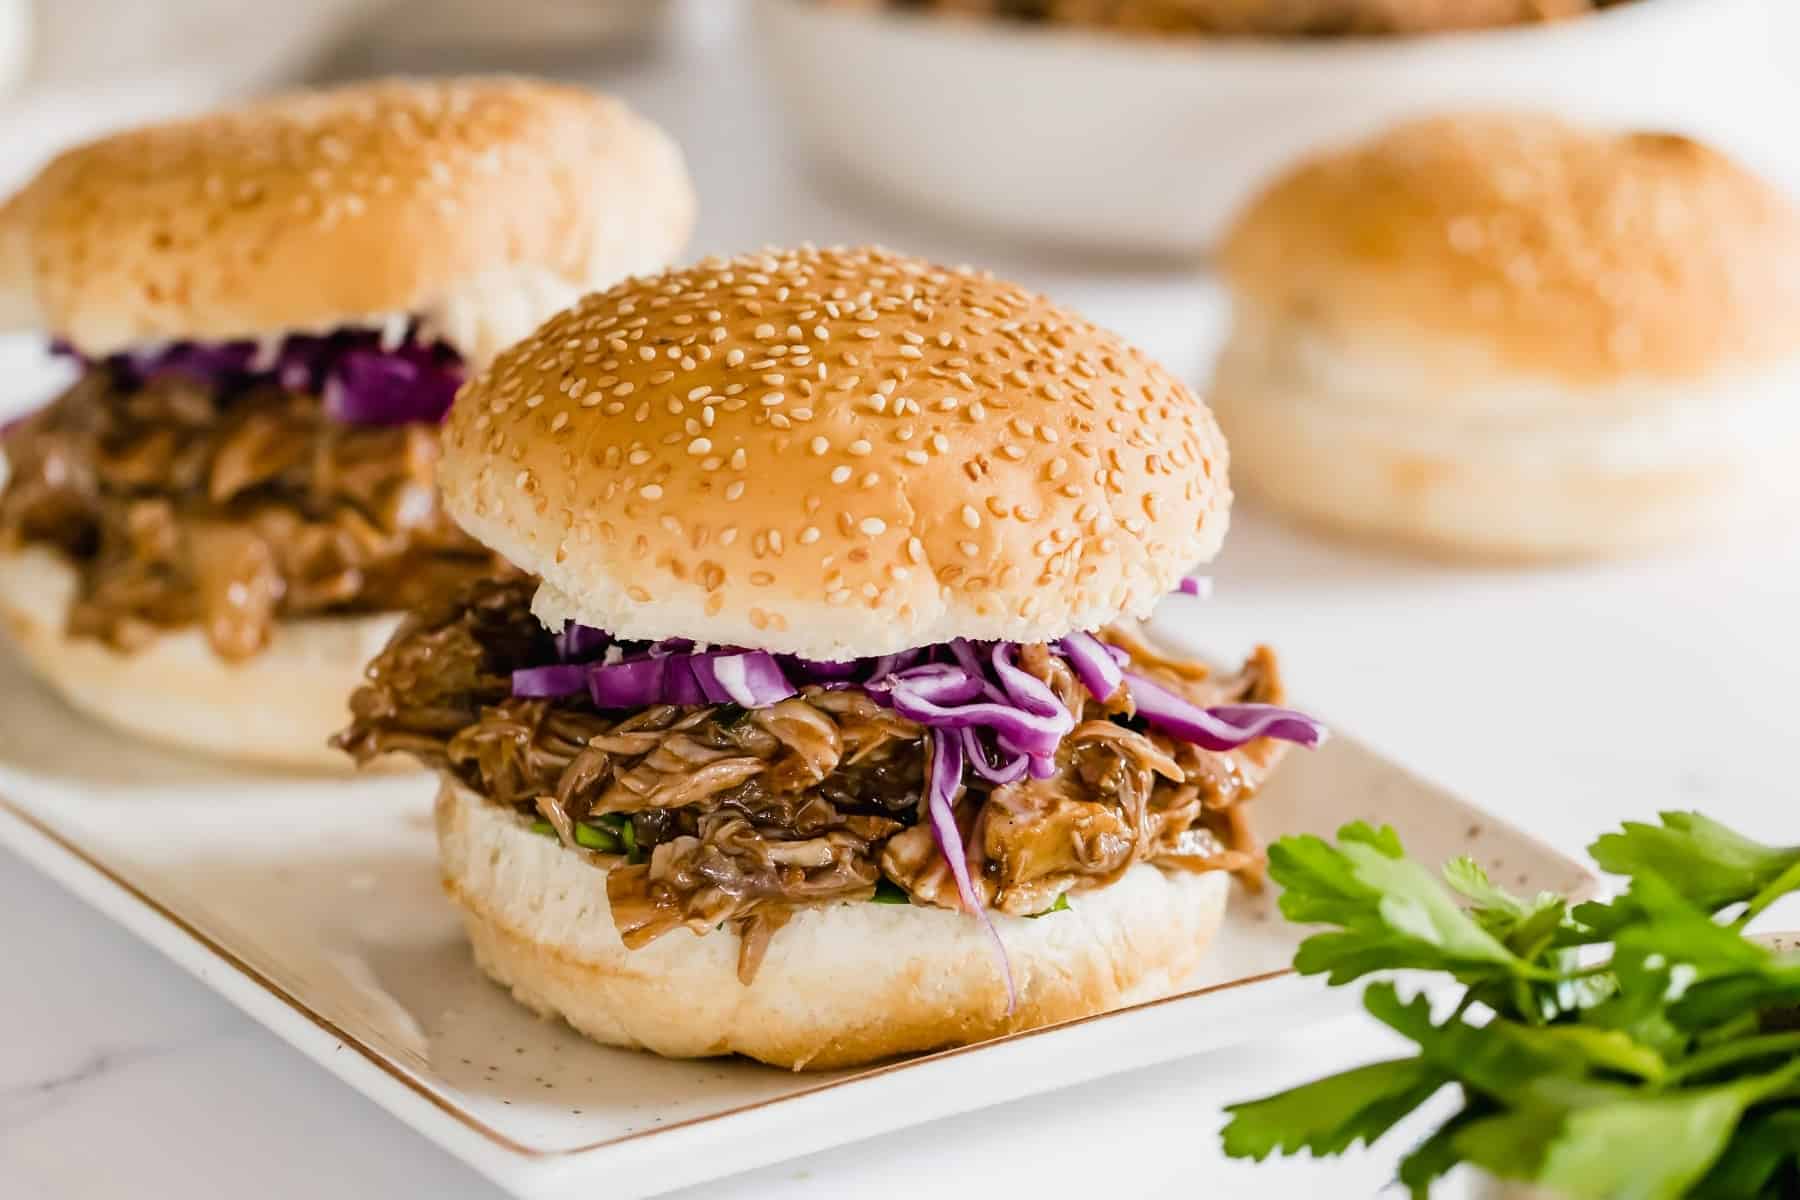 barbecue pulled pork sandwiches on sesame seed rolls.